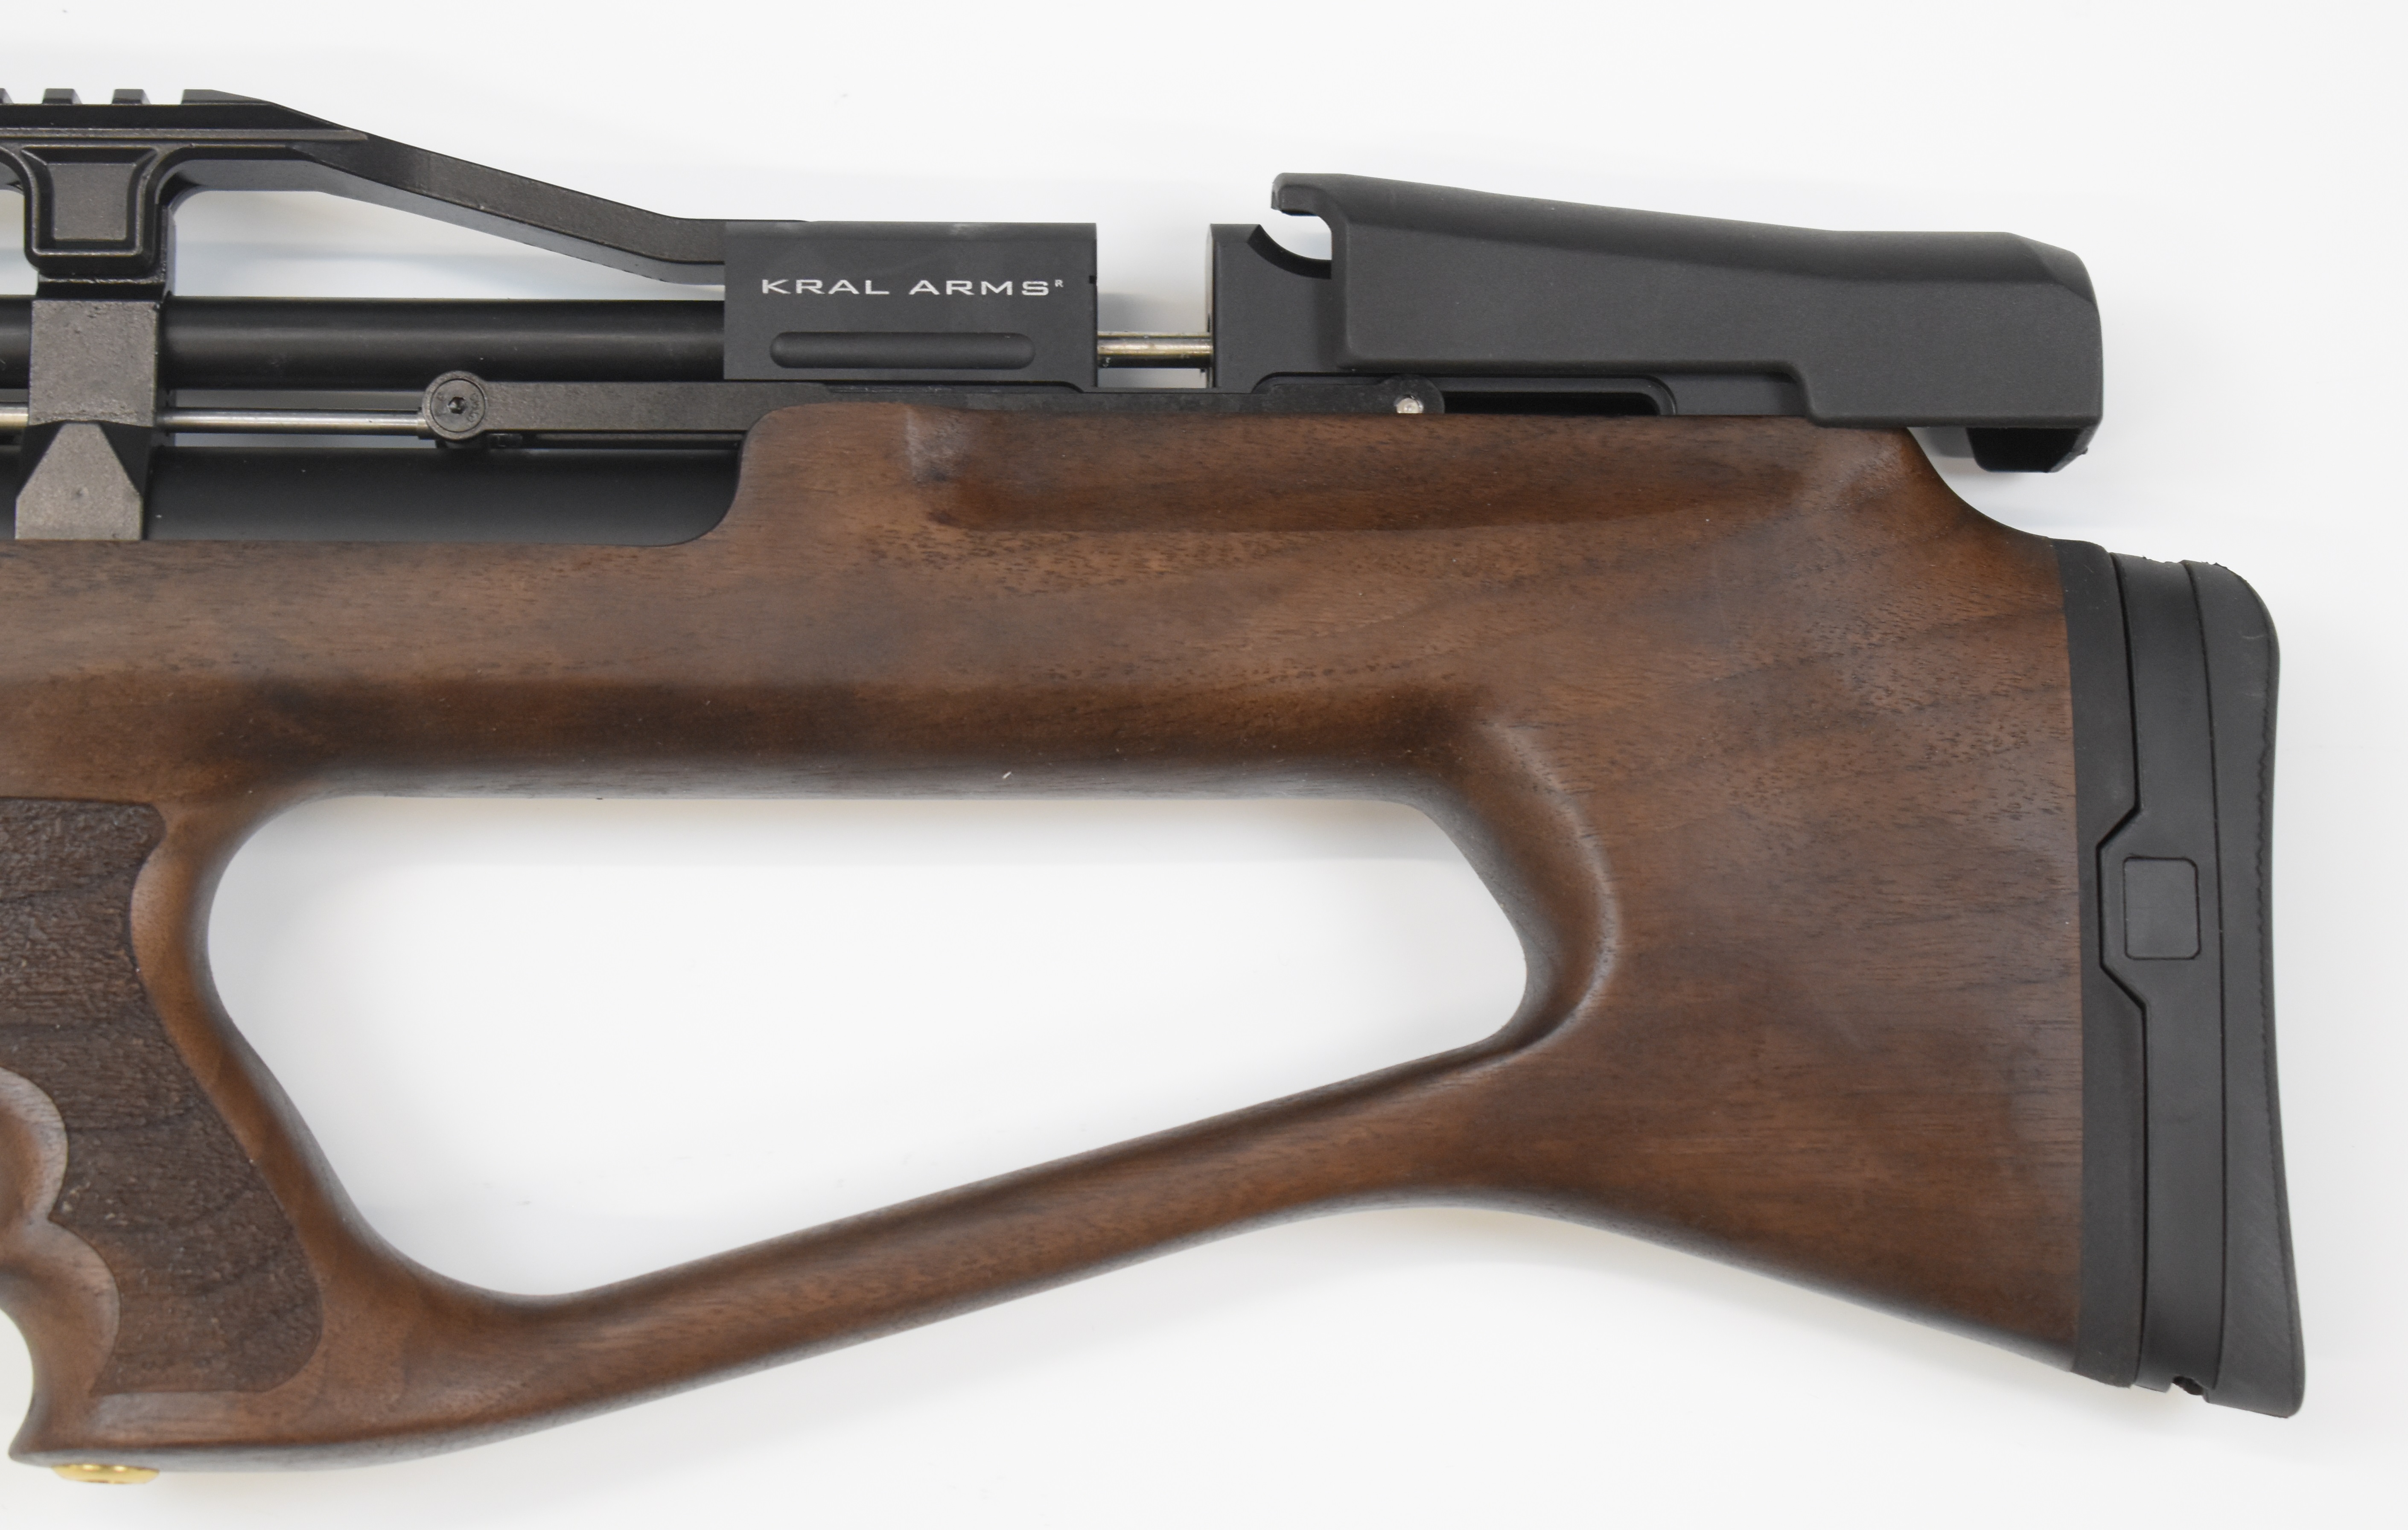 Kral Puncher Empire XS .22 PCP carbine air rifle with textured pistol grip, two 14-shot magazines - Image 7 of 9